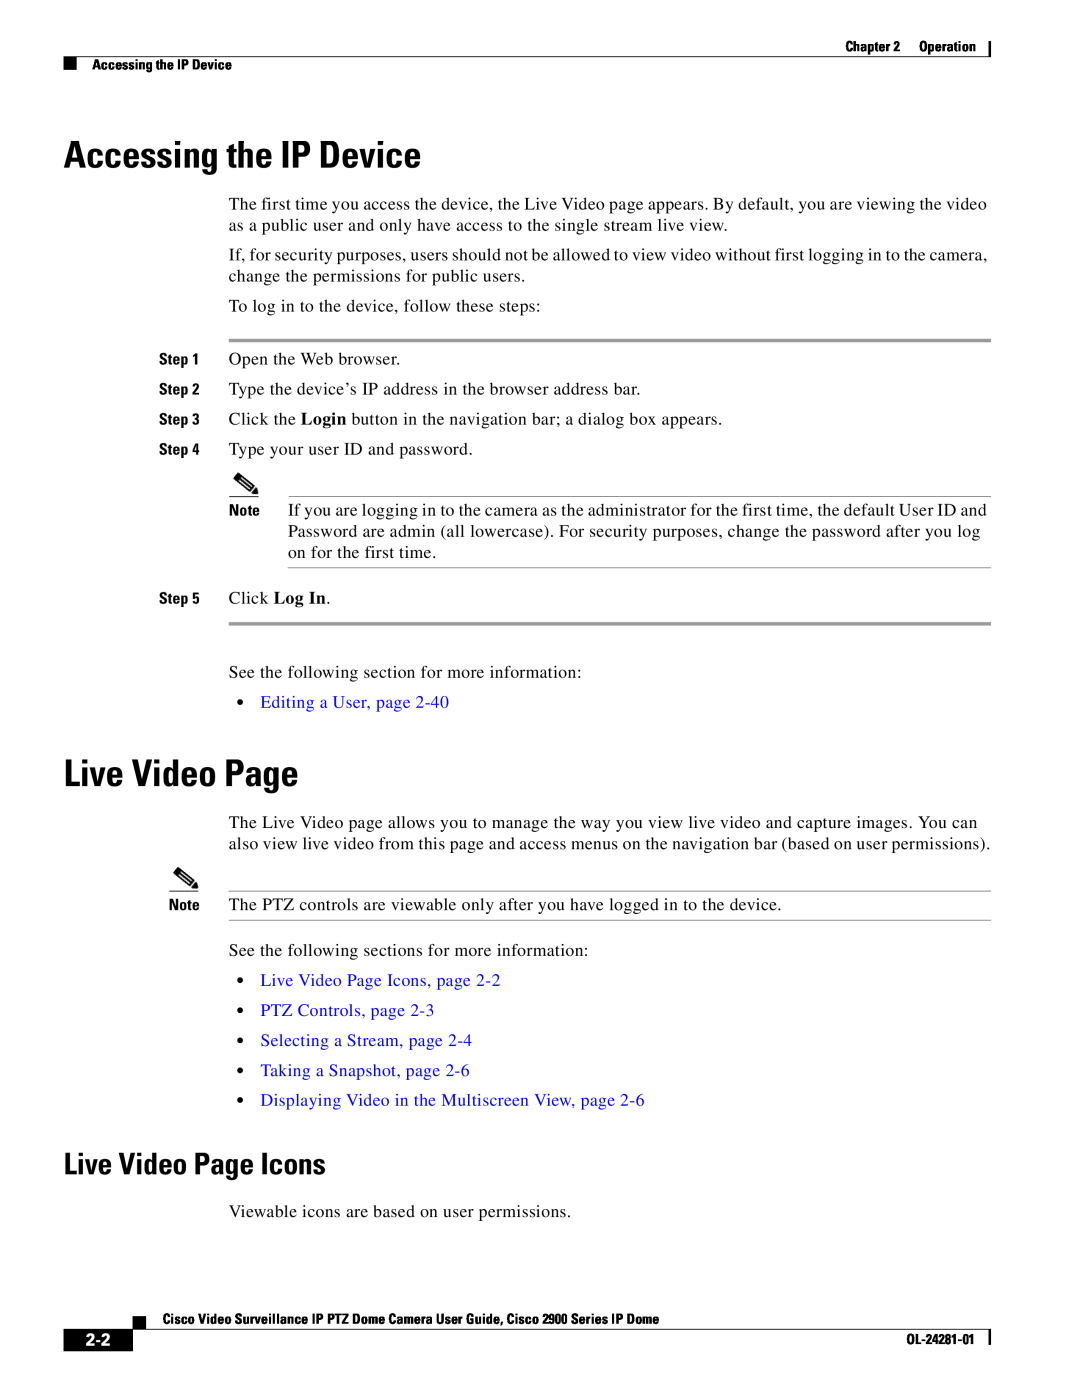 Cisco Systems OL-24281-01, 2900 manual Accessing the IP Device, Live Video Page Icons, Editing a User, page 